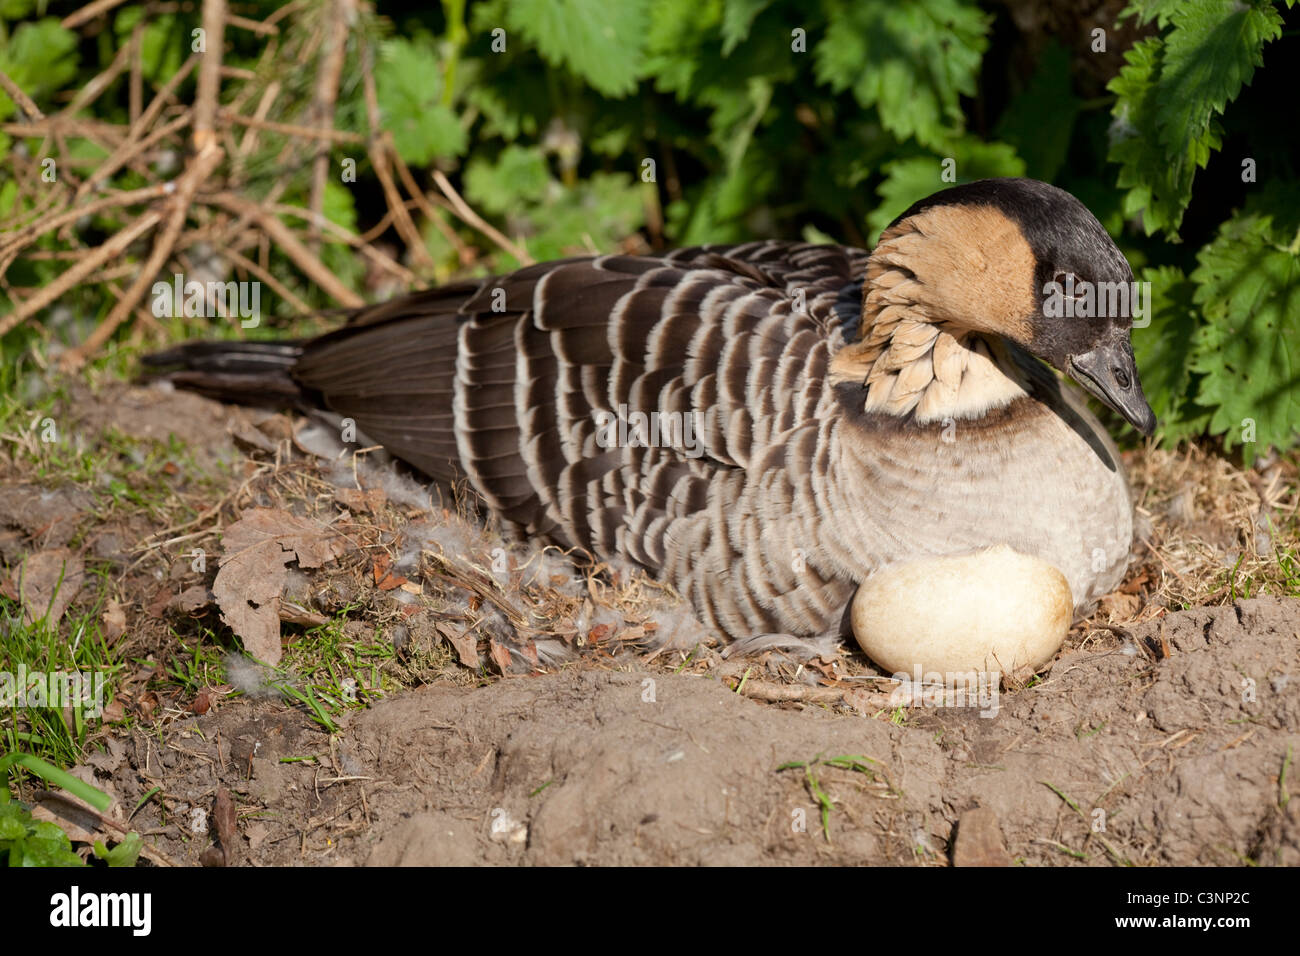 Hawaiian Goose or Ne-ne (Branta sandvicensis). Incubating goose on a nest. One of a clutch of six eggs left uncovered. Stock Photo